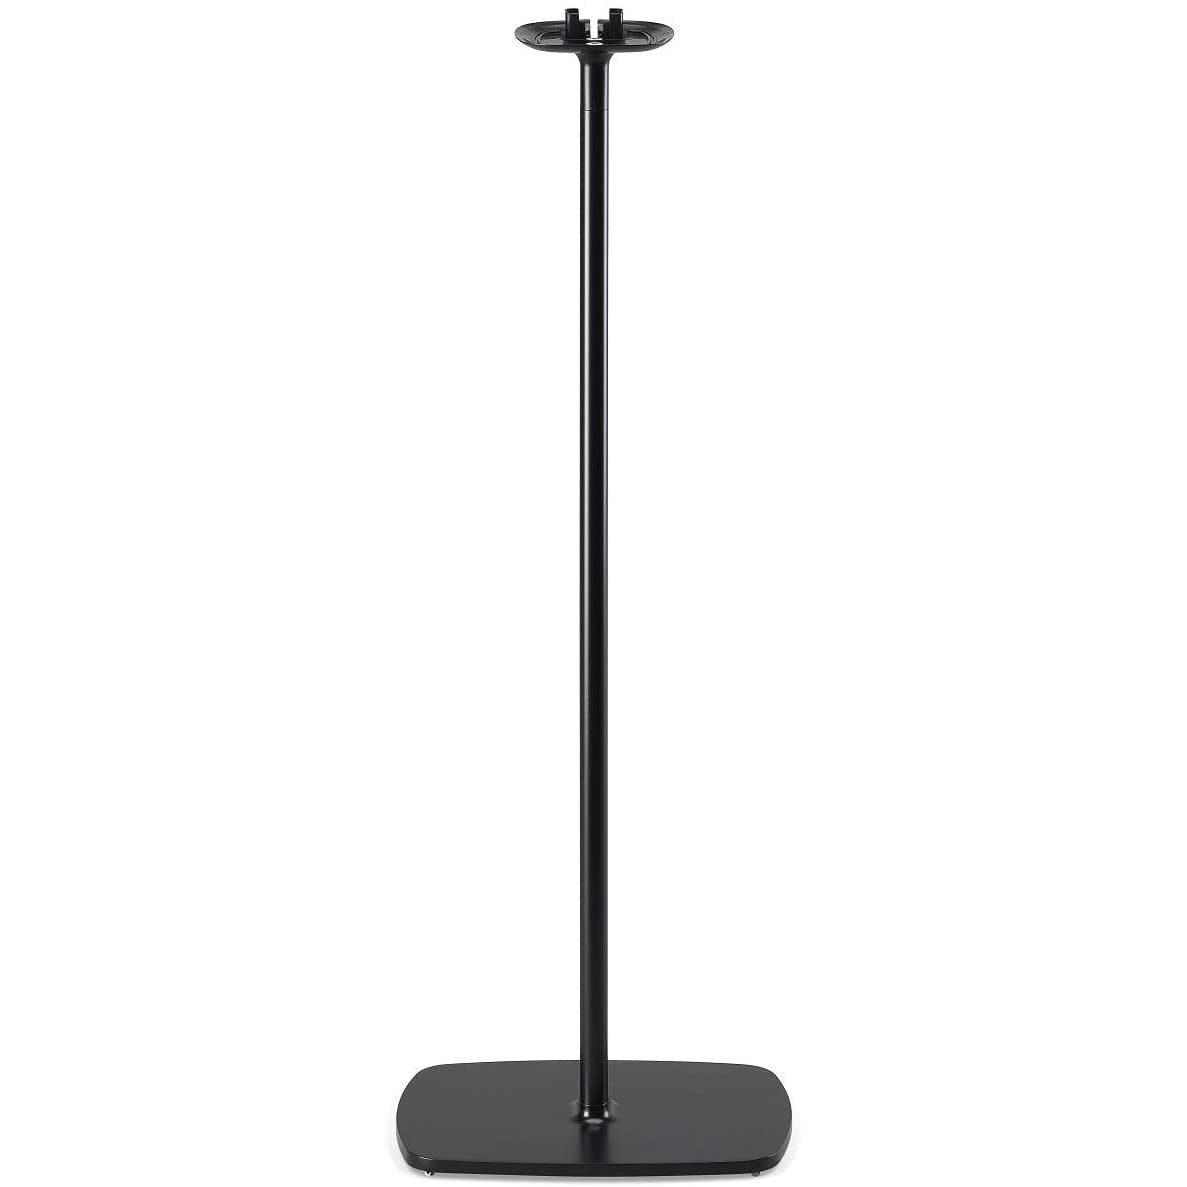 Flexson S1-FS Floor Stand for Sonos One, Black - Good Condition